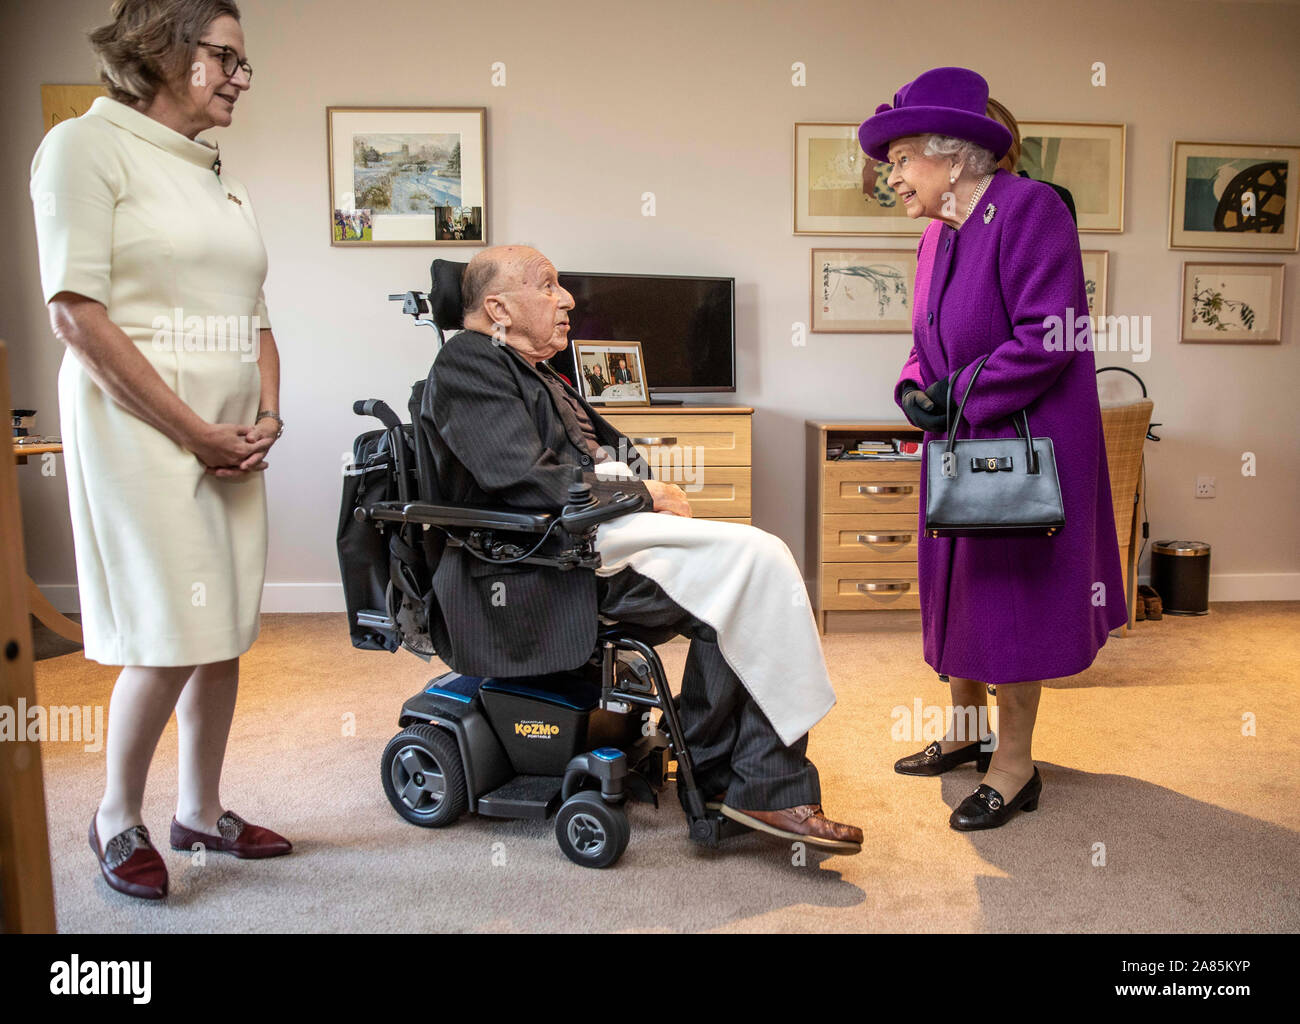 Queen Elizabeth II meets with world war two veteran and former 'Chindit' from the Burma campaign John Riggs, aged 98 years, in his new apartment in he new Appleton Lodge care facility run by the RBLI. The Queen visited the Royal British Legion Industries village in Aylesford, Kent, to celebrate the charity's centenary year. Stock Photo